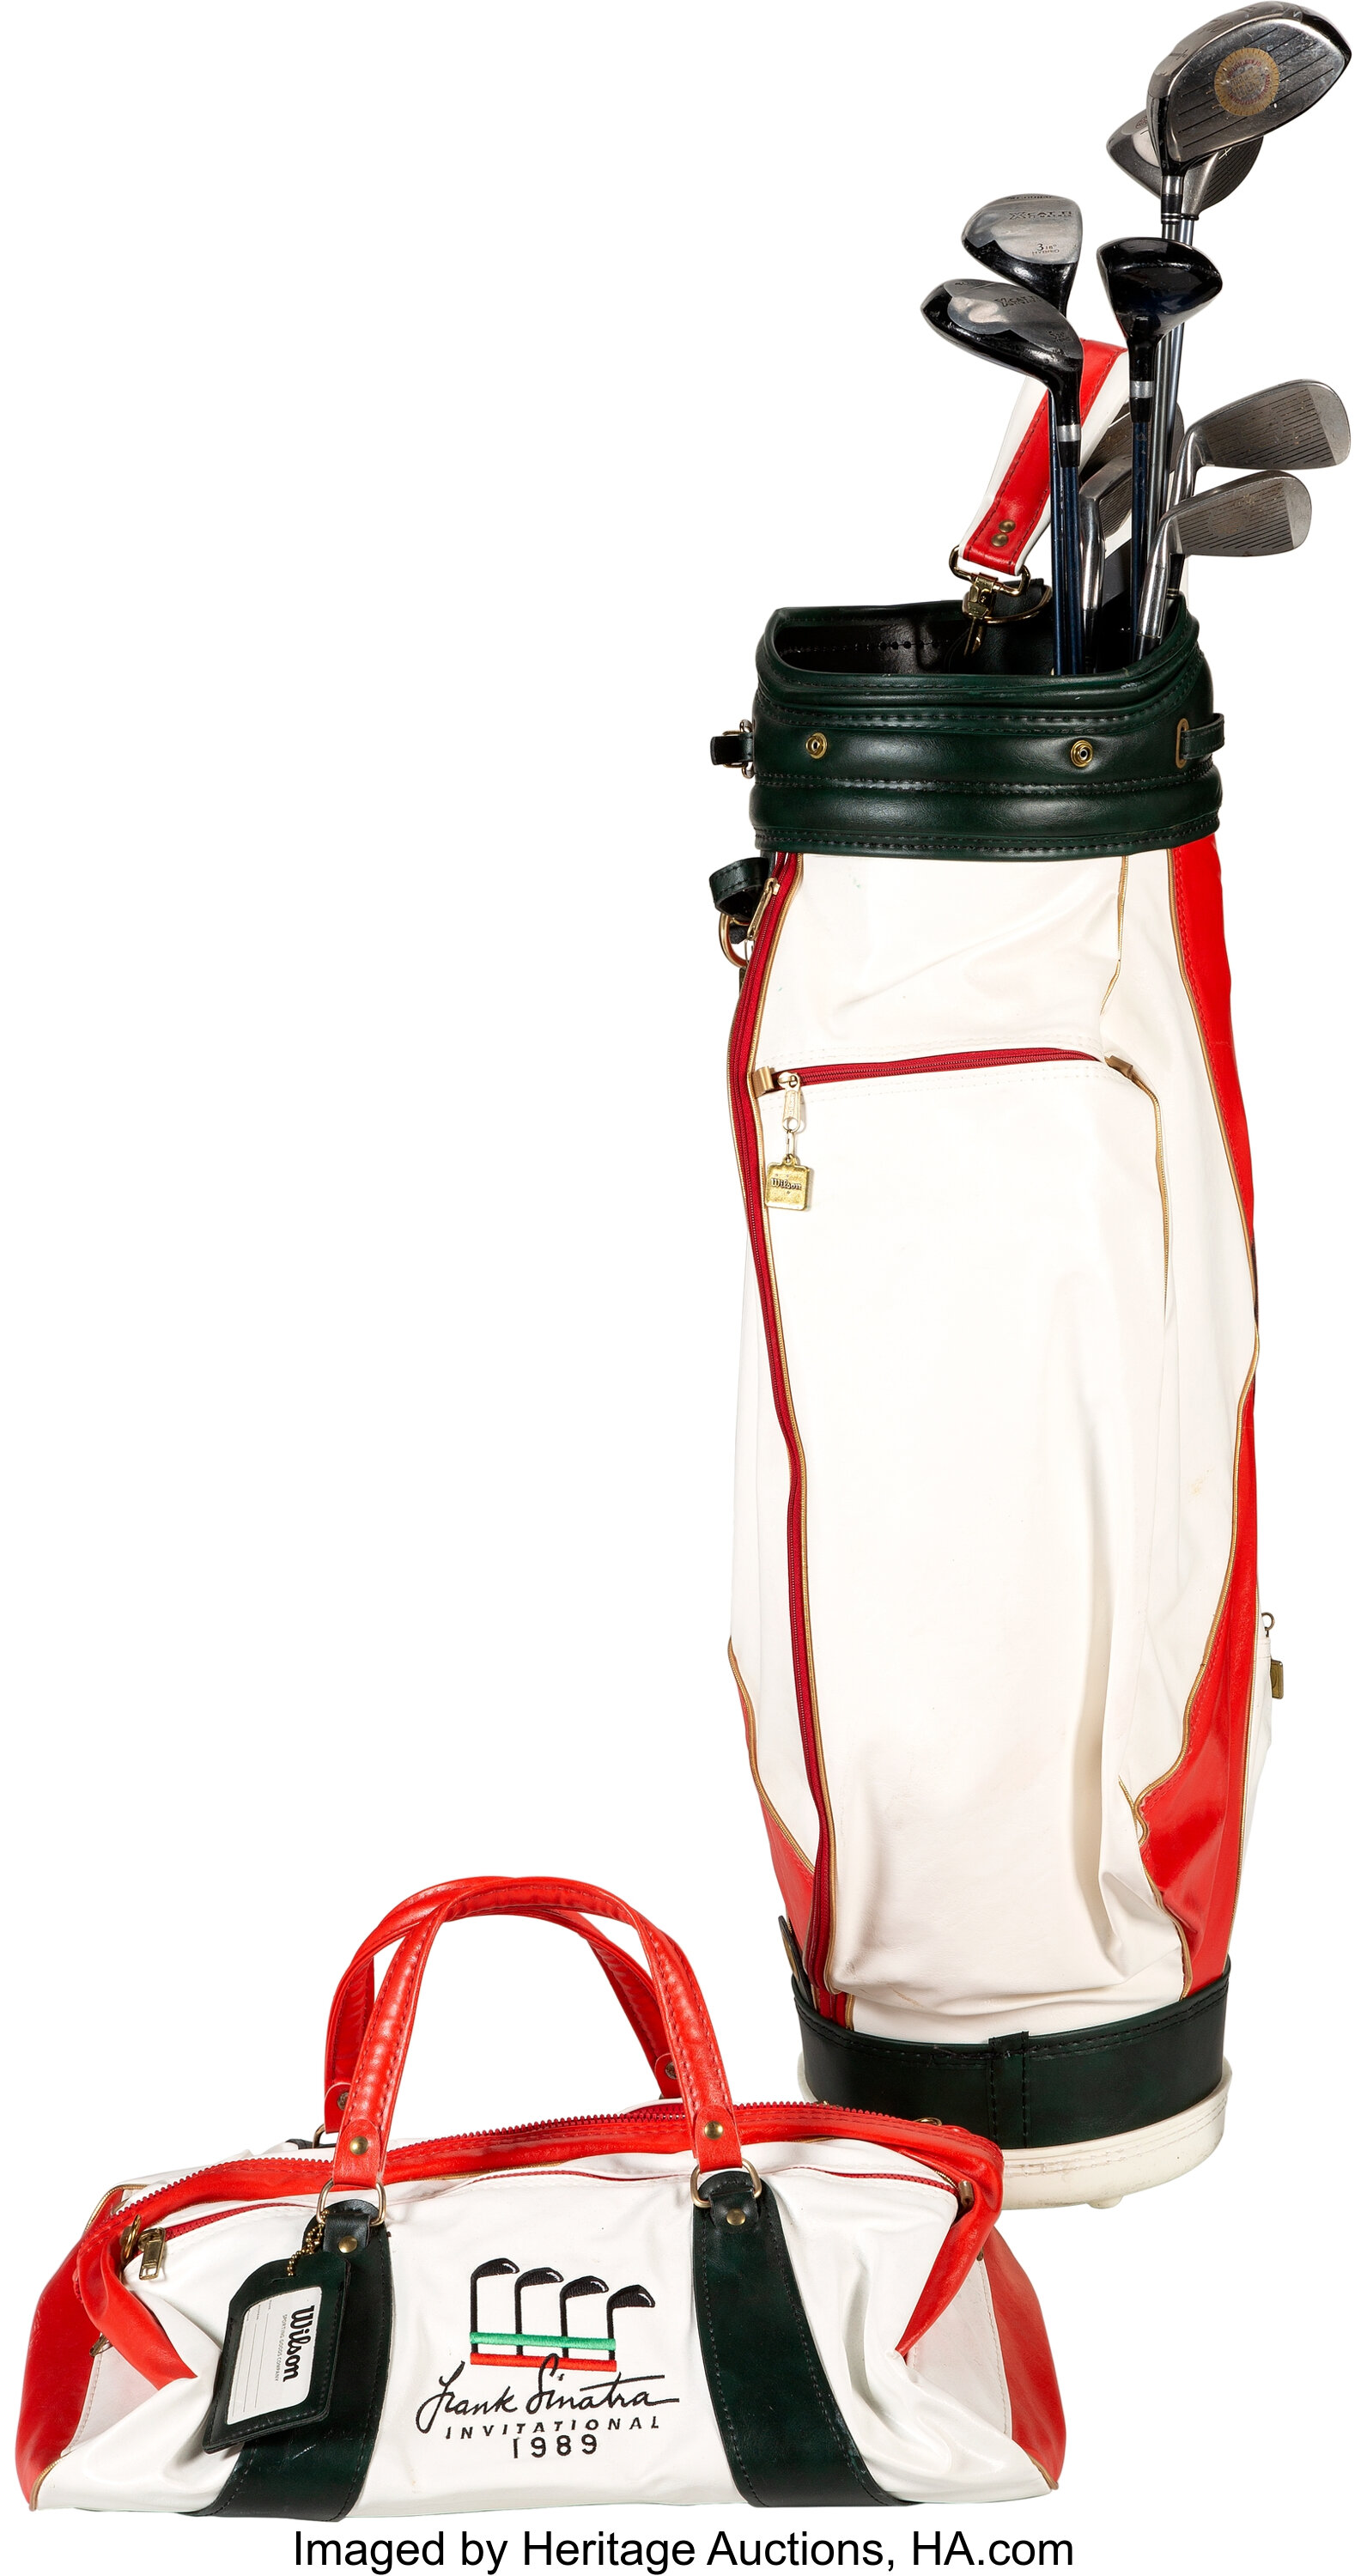 Sold at Auction: Vintage Golf Bag and Clubs